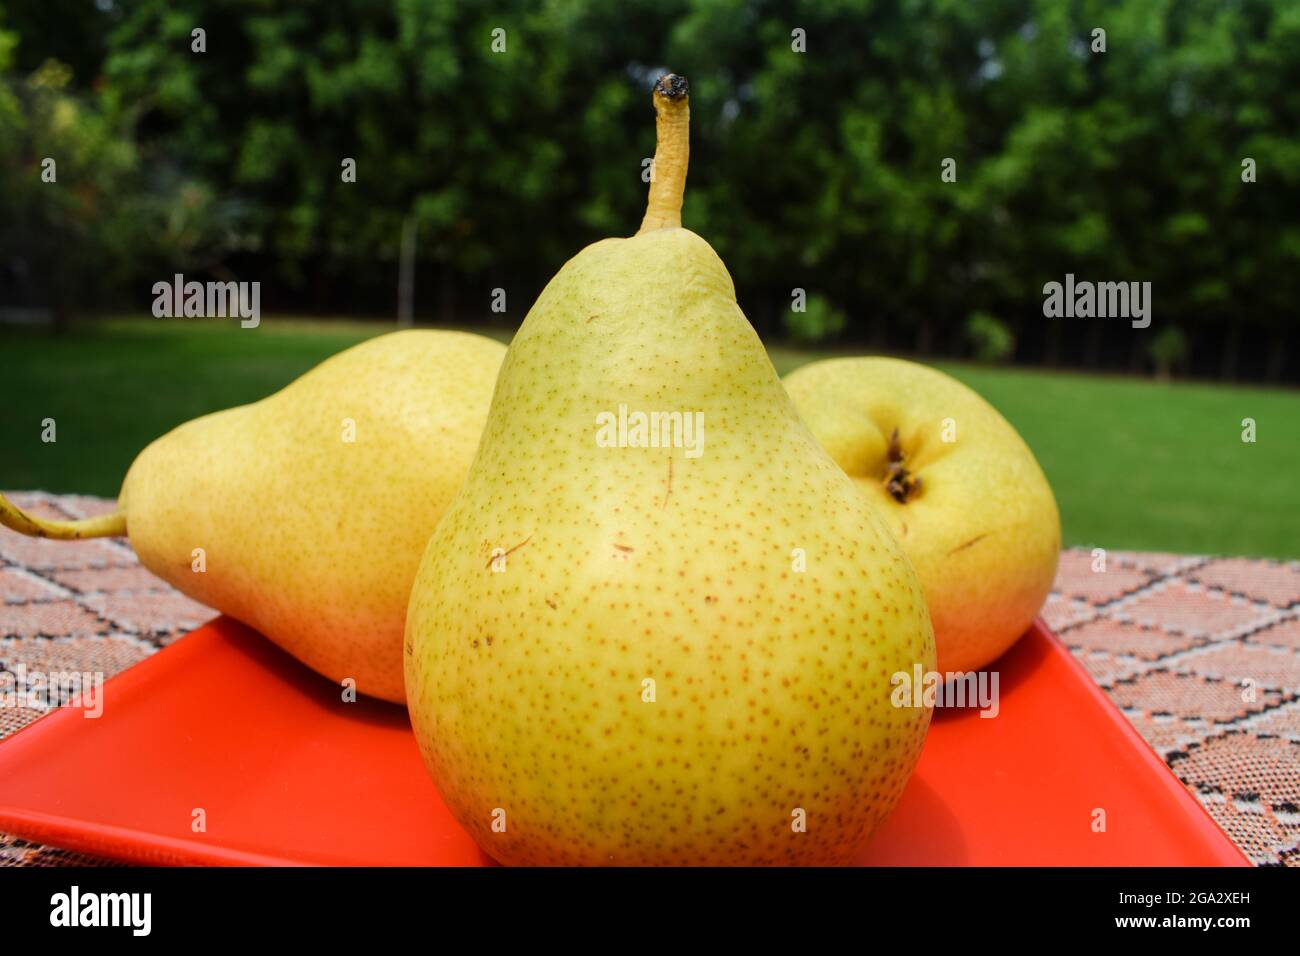 Top view of Pear fruits . Sweet soft delicious fruits on table nature lush green background. Stock Photo